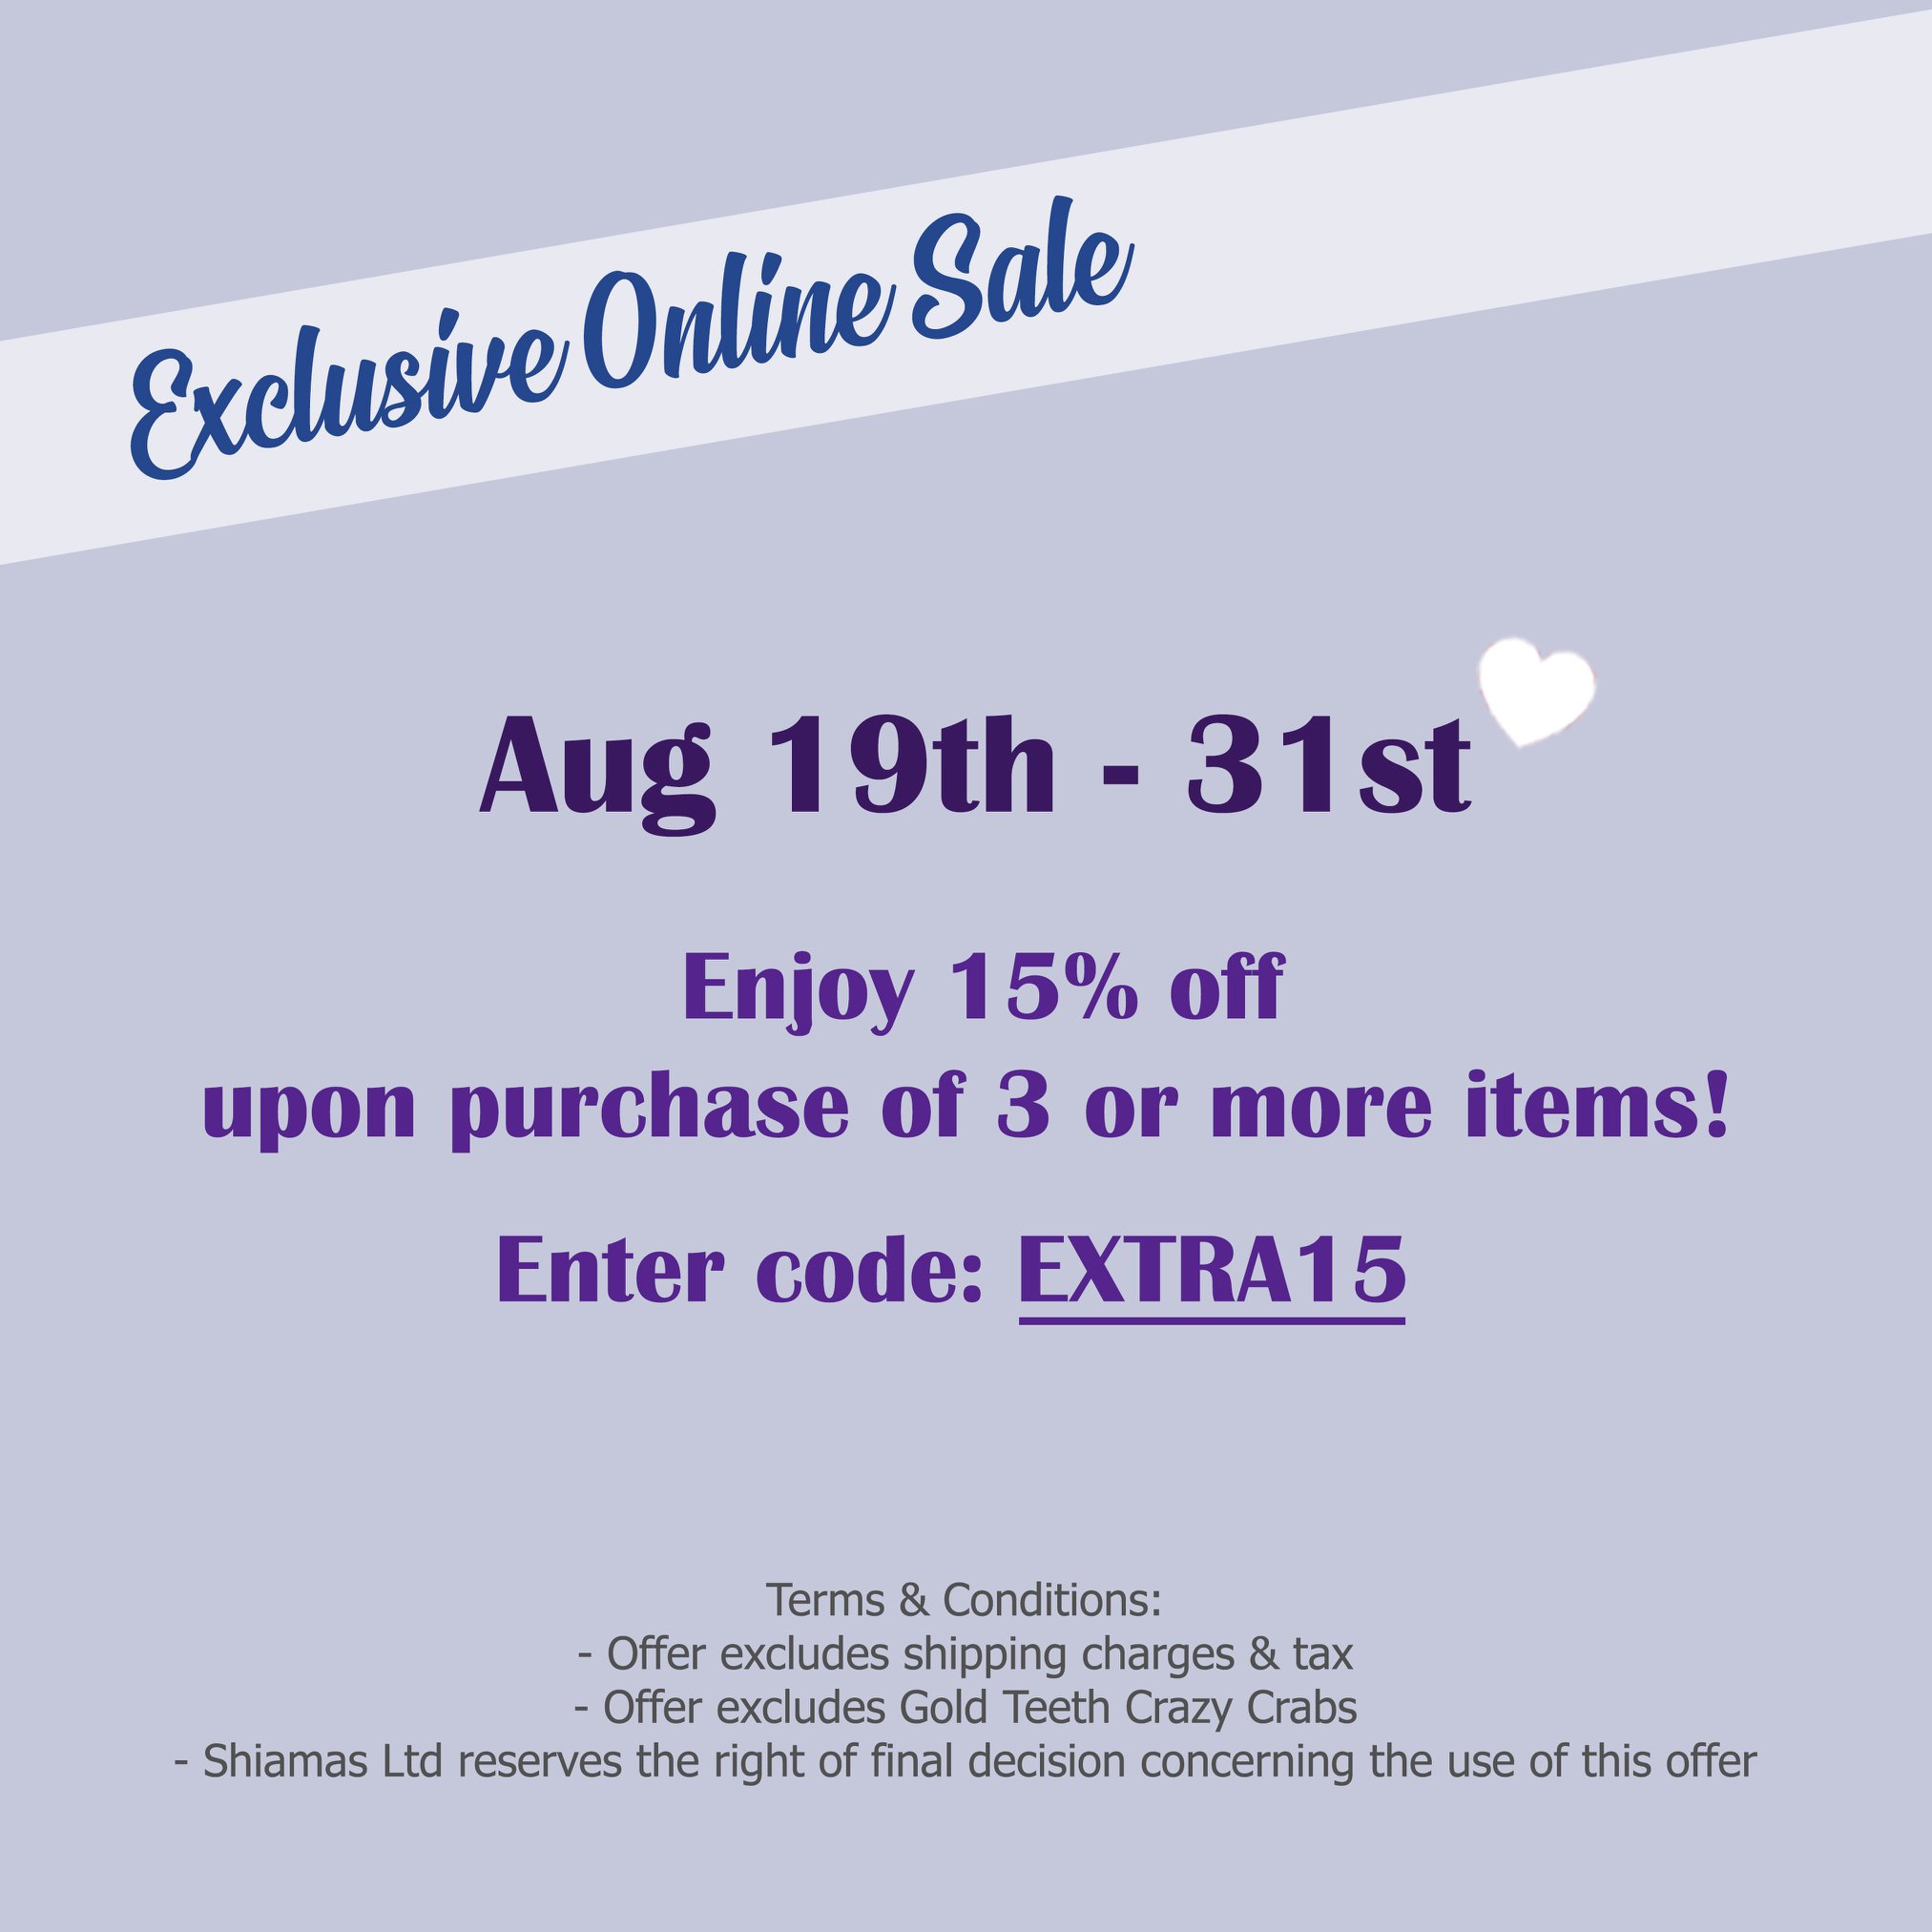 15% off upon purchase of 3 or more items from today to 31st August, 2019. Enjoy the exclusive privilege by entering the code "EXTRA15" before payment on our online shop today! 由即日起至 8月31日，於 Alexandre Zouari的網上商店購買三件或以上貨品，於付款前輸入"EXTRA15"優惠碼，即可獲獨家八五折優惠！ For any updates of AZ:...